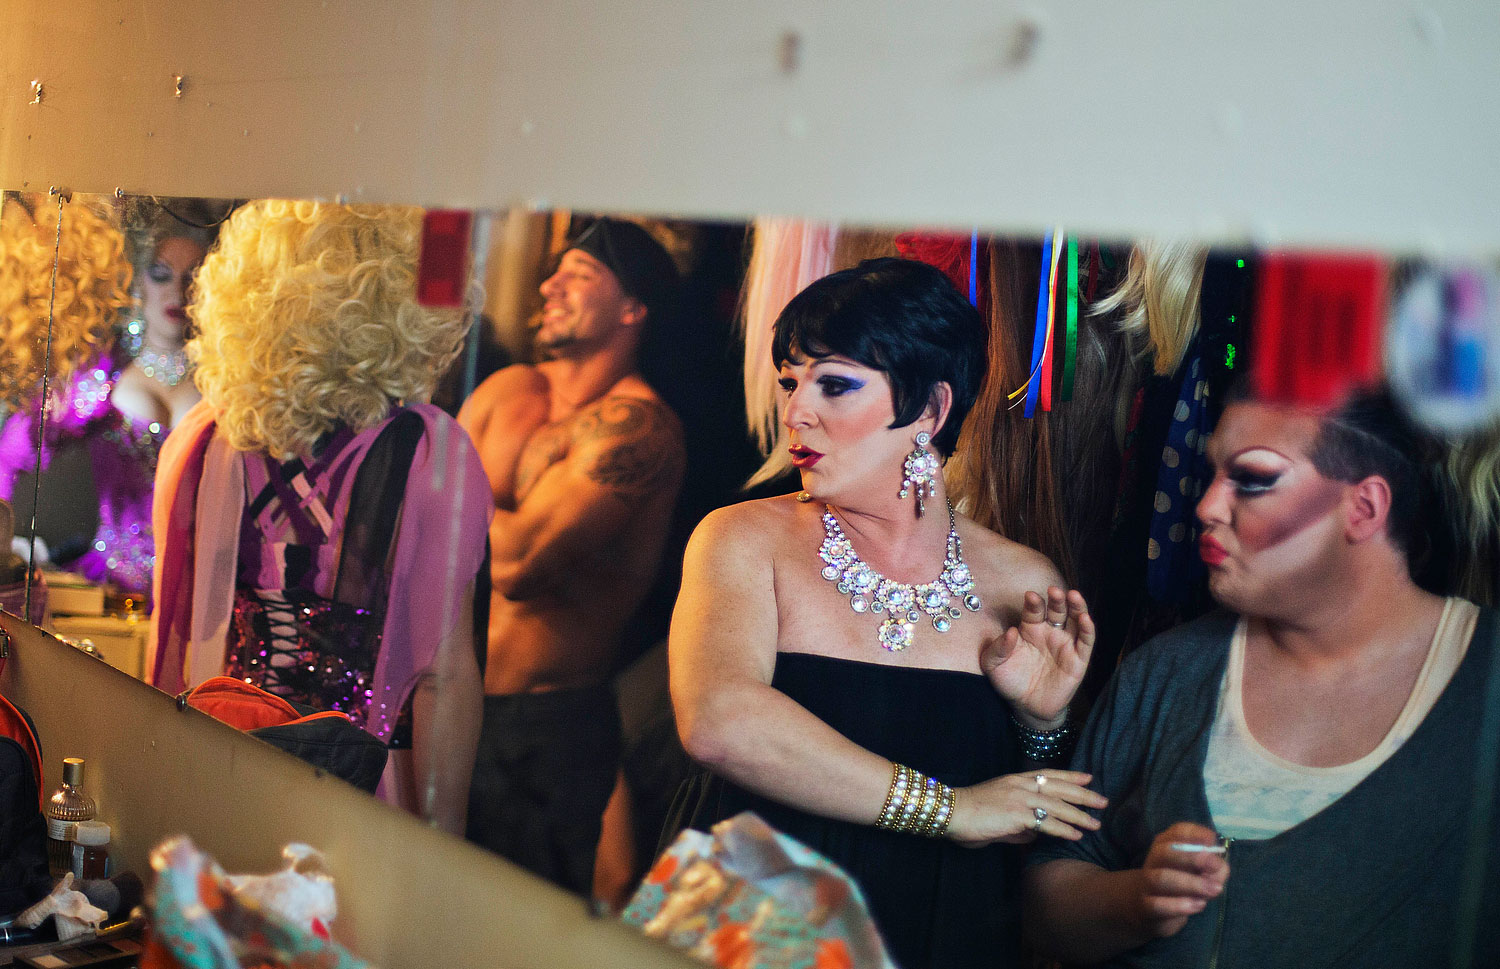 Andrei Sarkisian, second from right, who goes by the stage name of Miss Zhuzha, gets ready backstage before a performance at the Mayak cabaret in Sochi, Feb. 8, 2014.